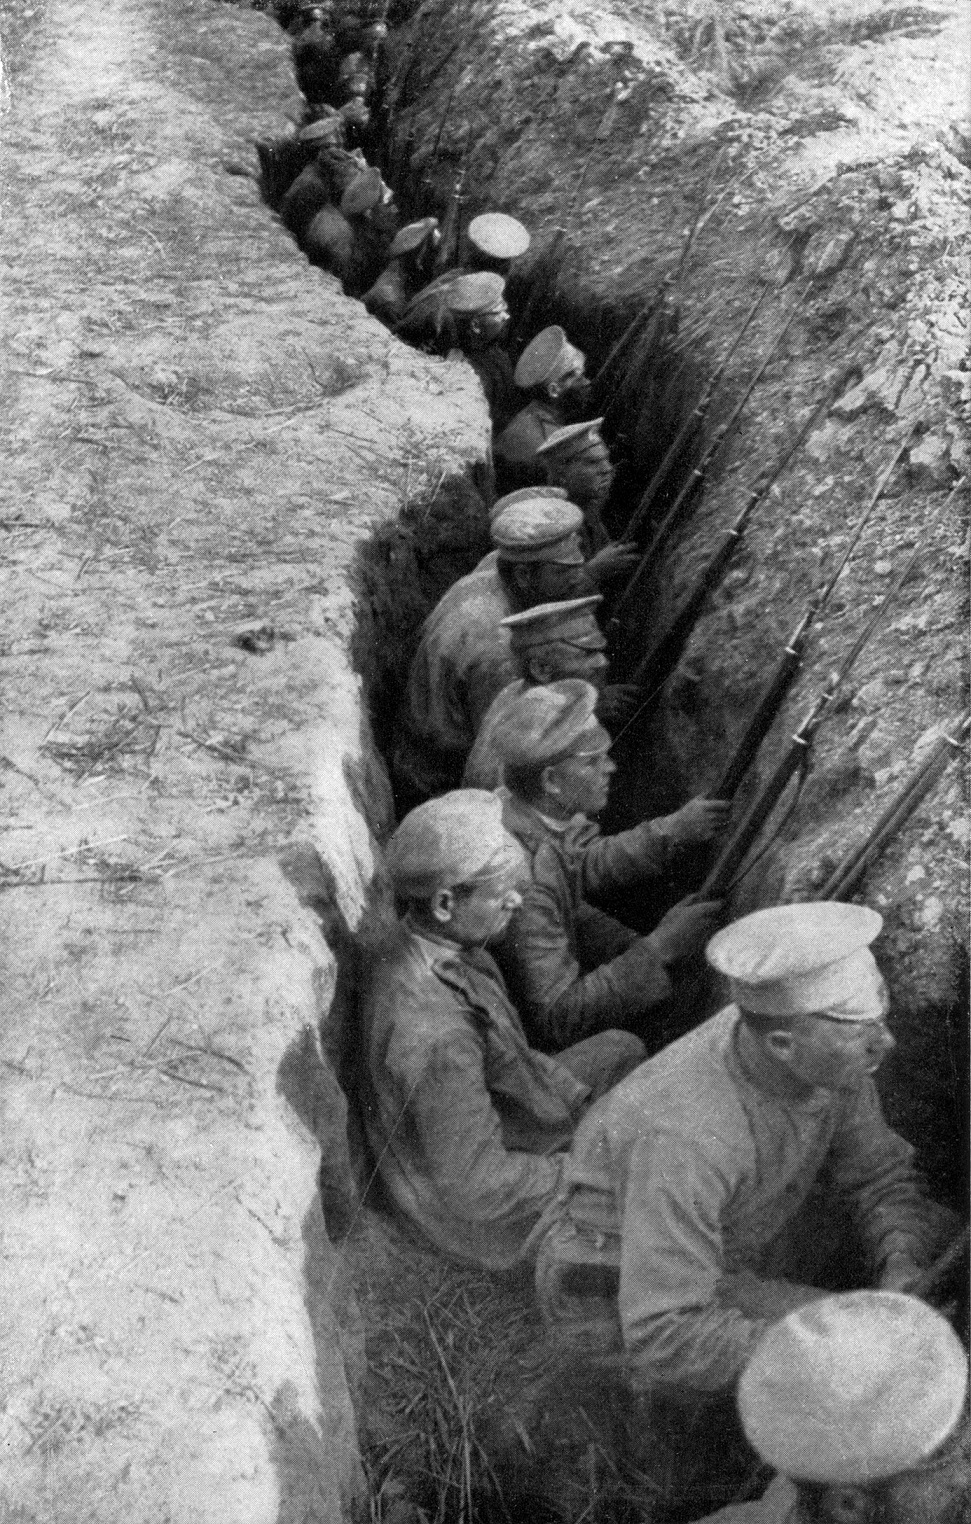 Russian troops in the trenches - Photo: Public Domain